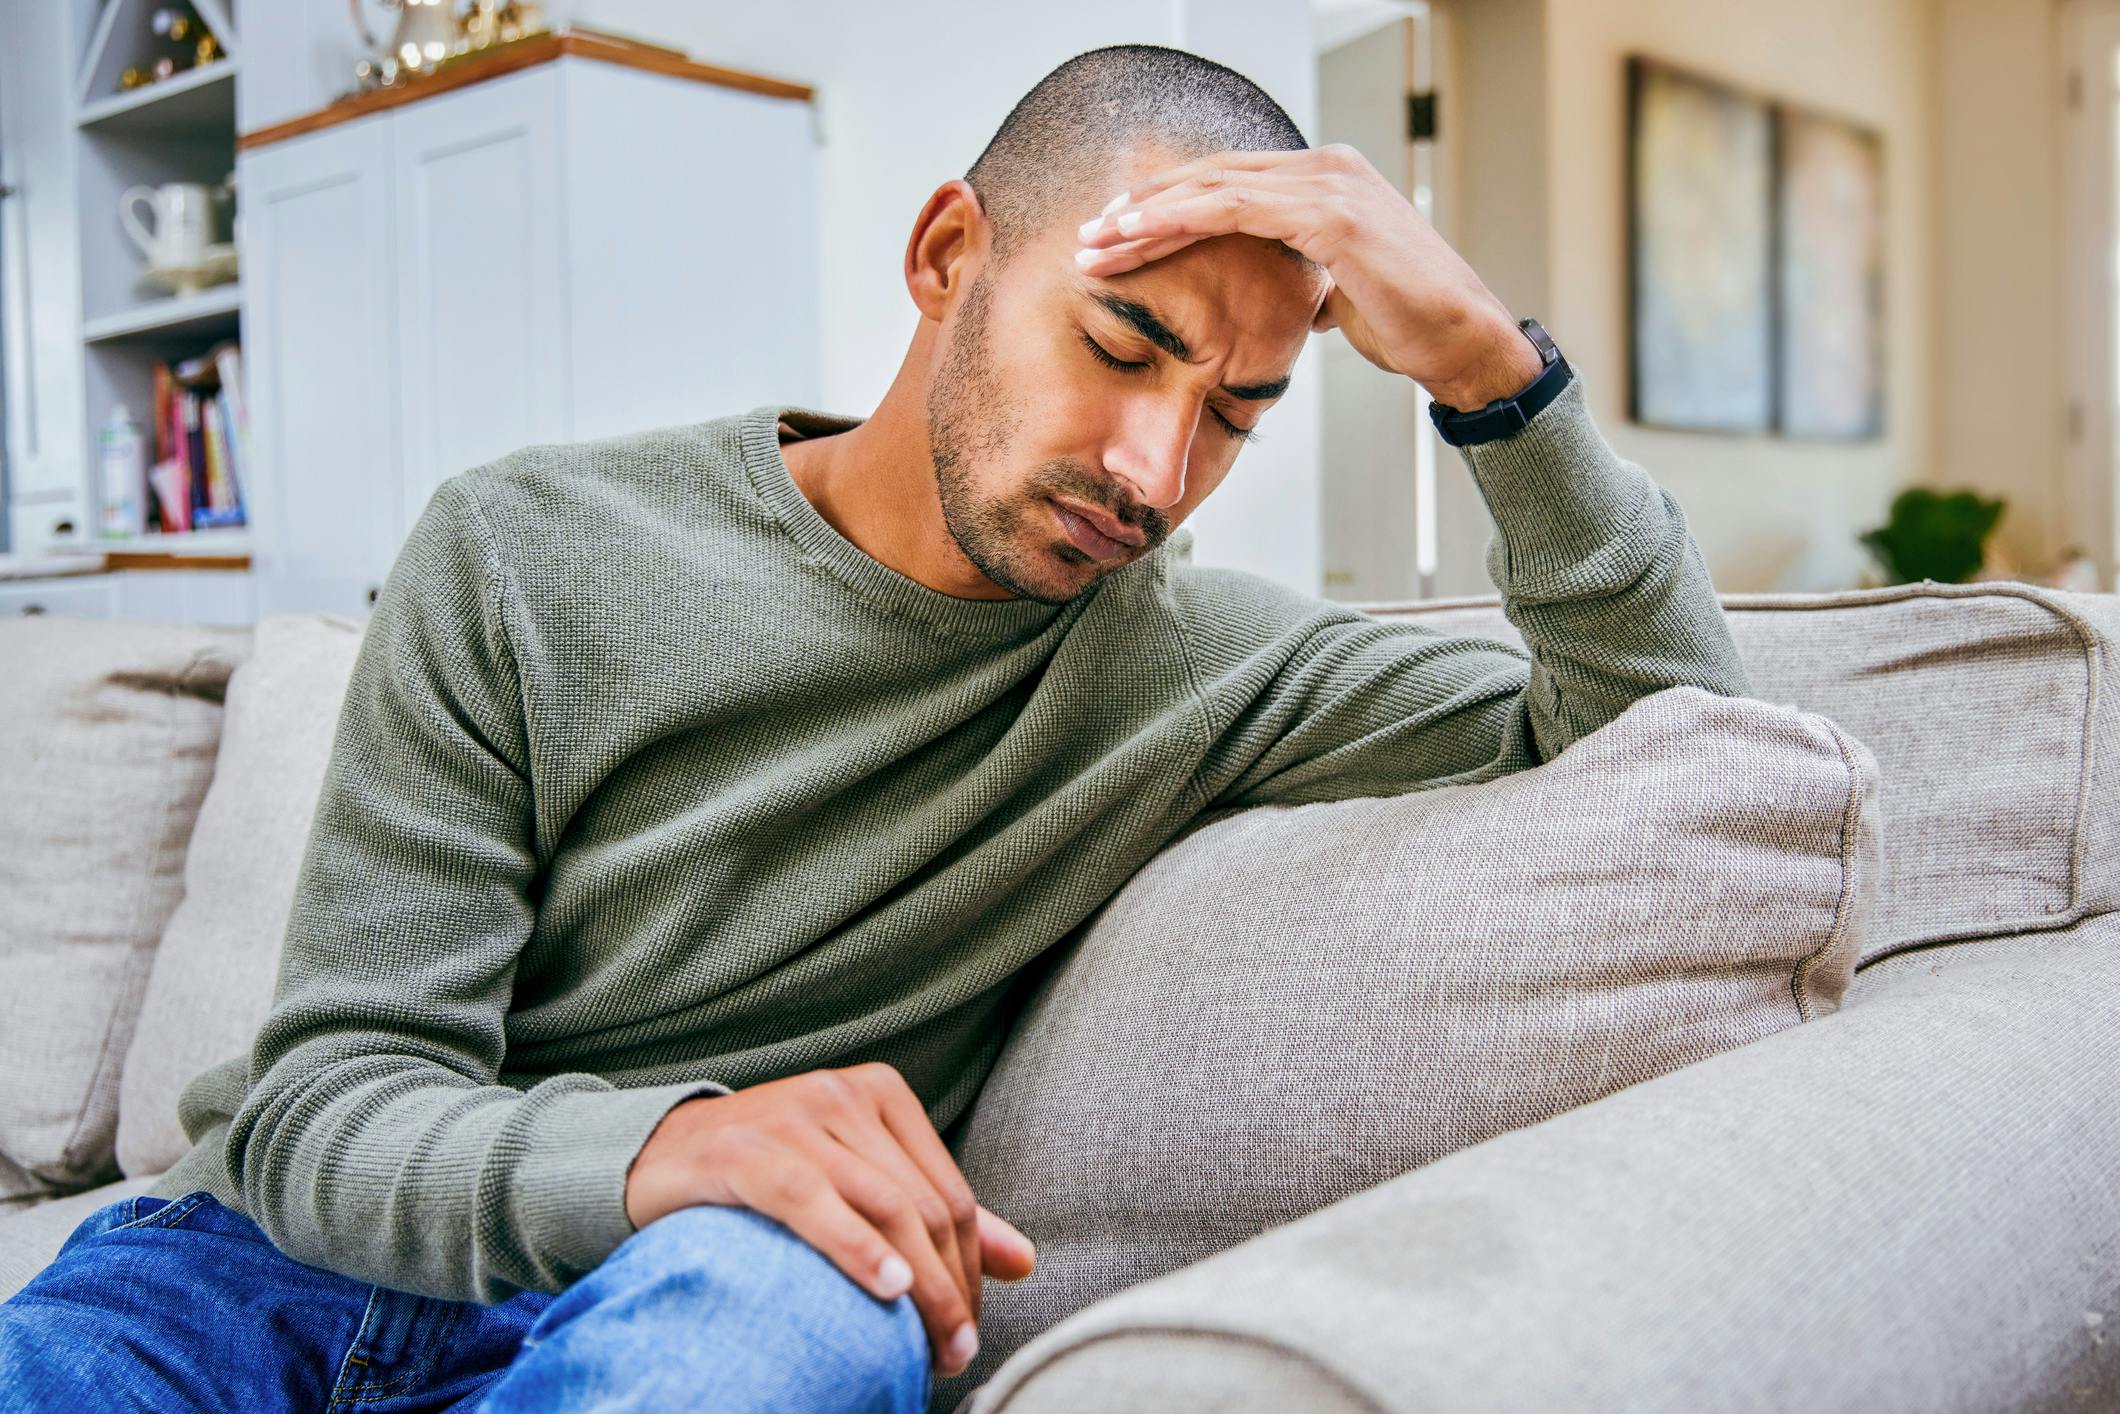 Man sitting on couch with headache